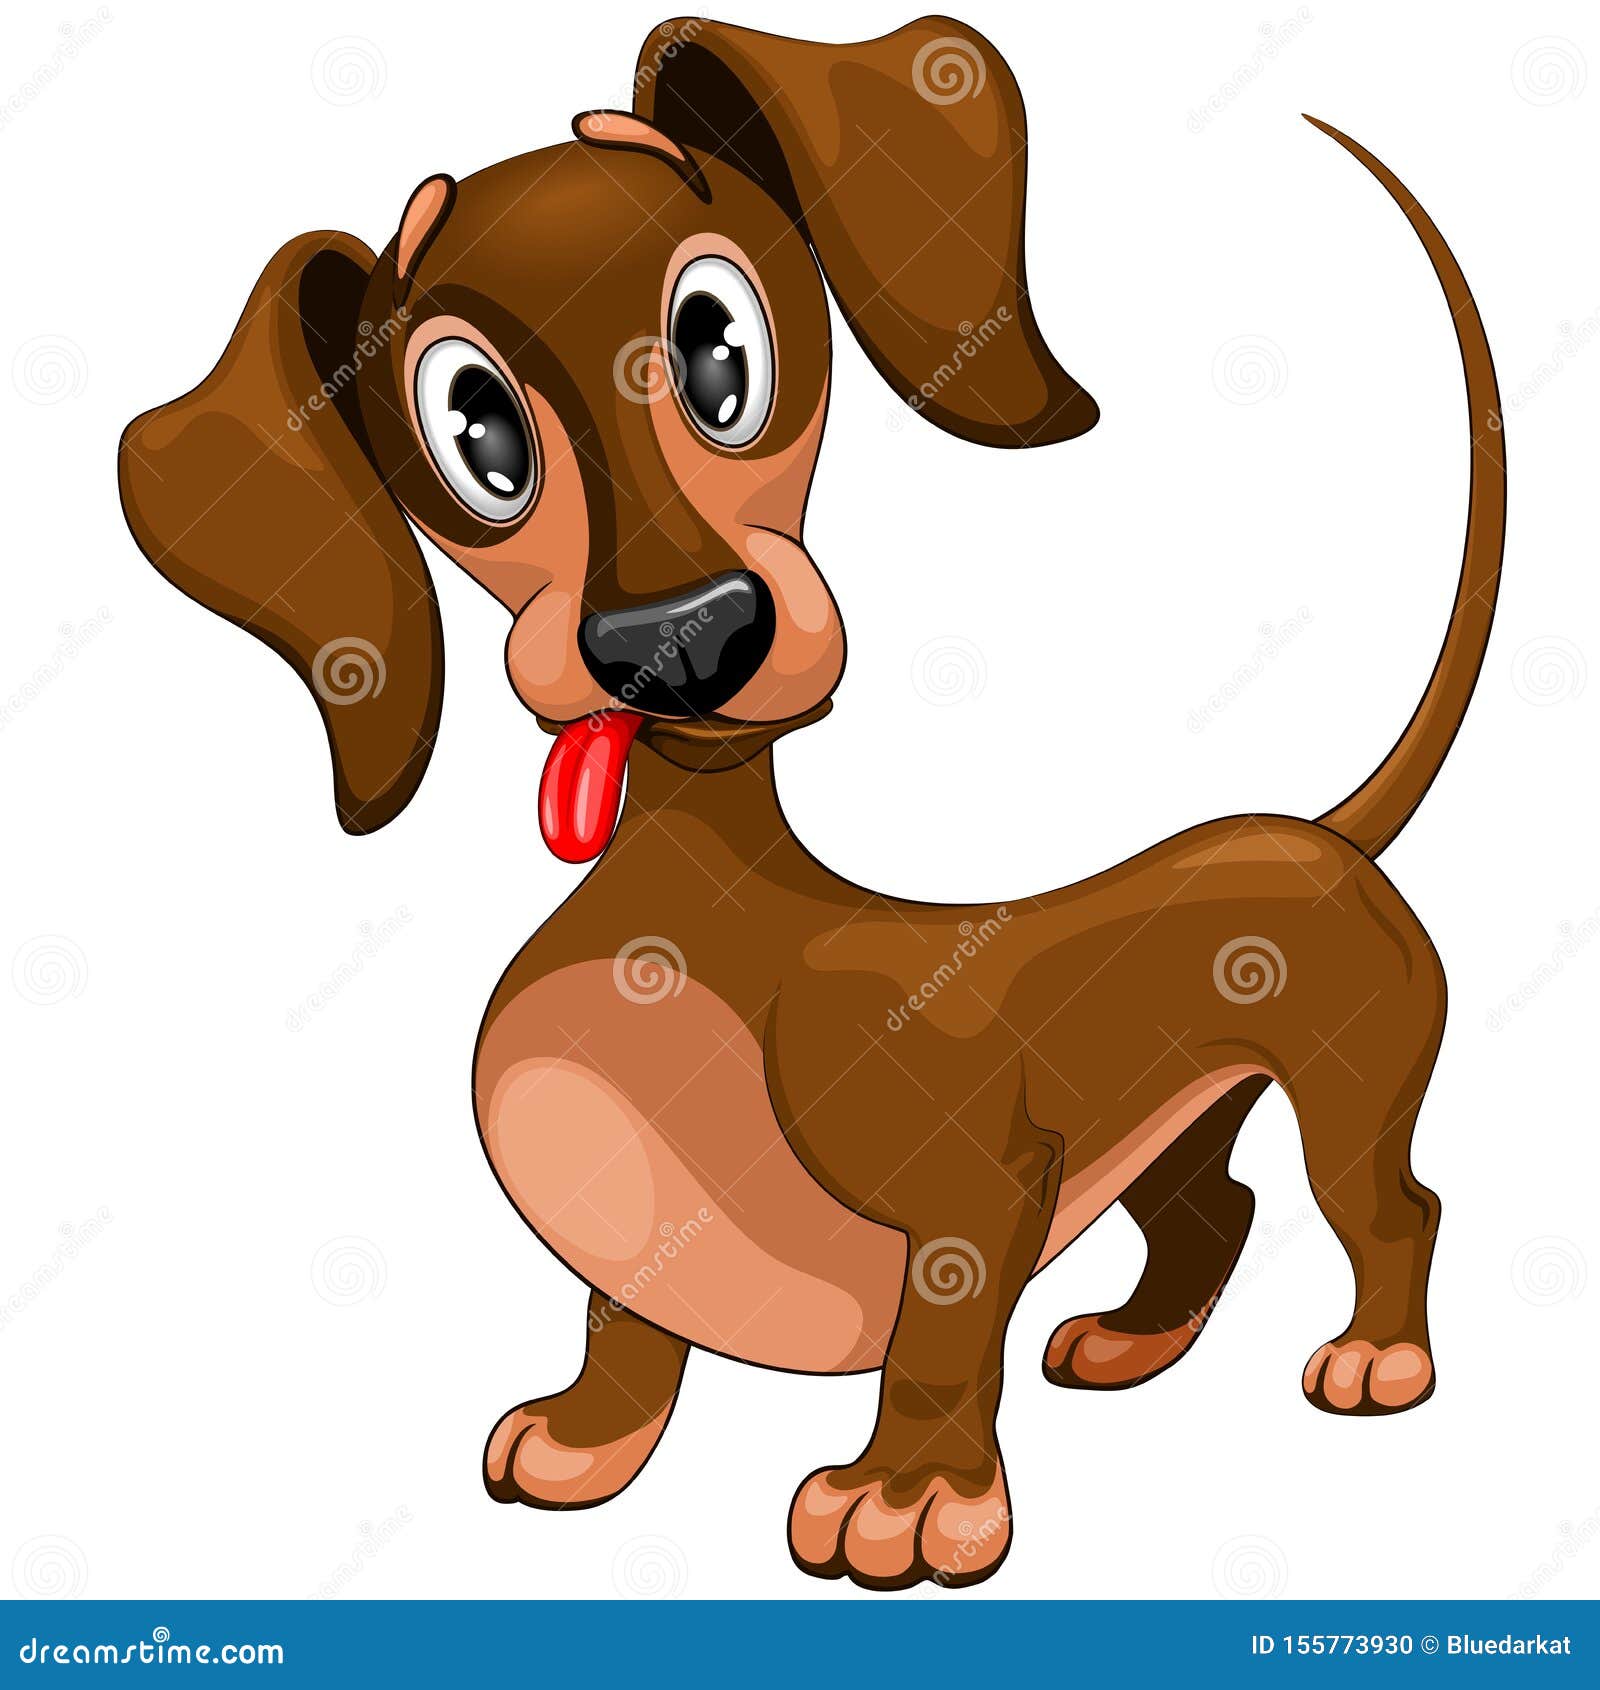 Dachshund Cute Confused Puppy Dog Cartoon Character Vector Illustration  Stock Vector - Illustration of companion, hangingtongue: 155773930